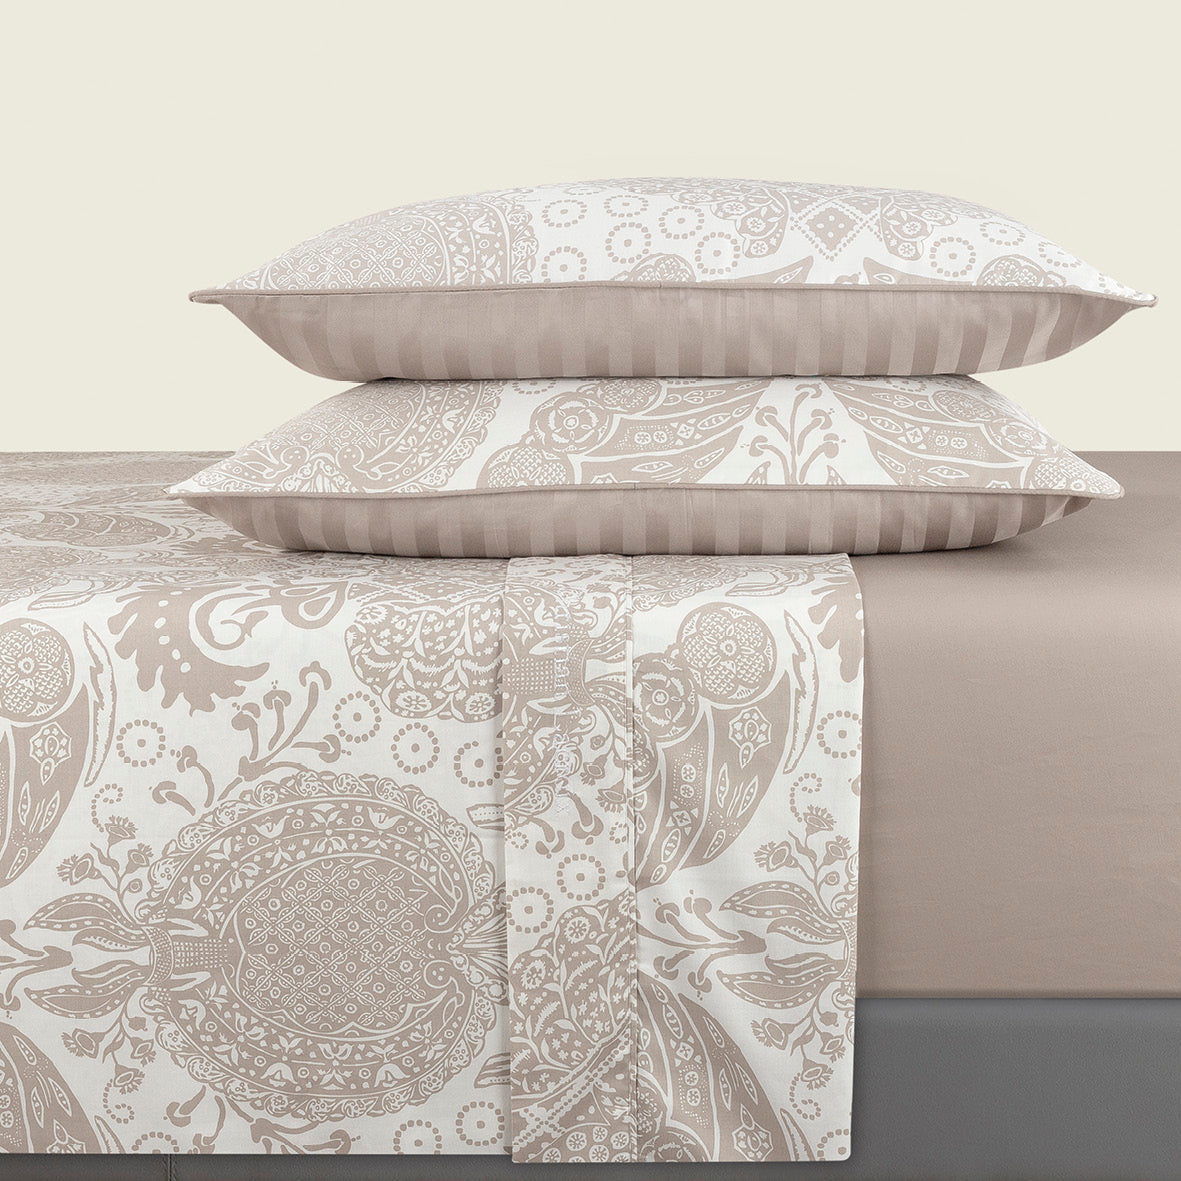 Set of sheets : fitted sheet, flat sheet, pillowcase(s) in cotton satin - Arles Taupe